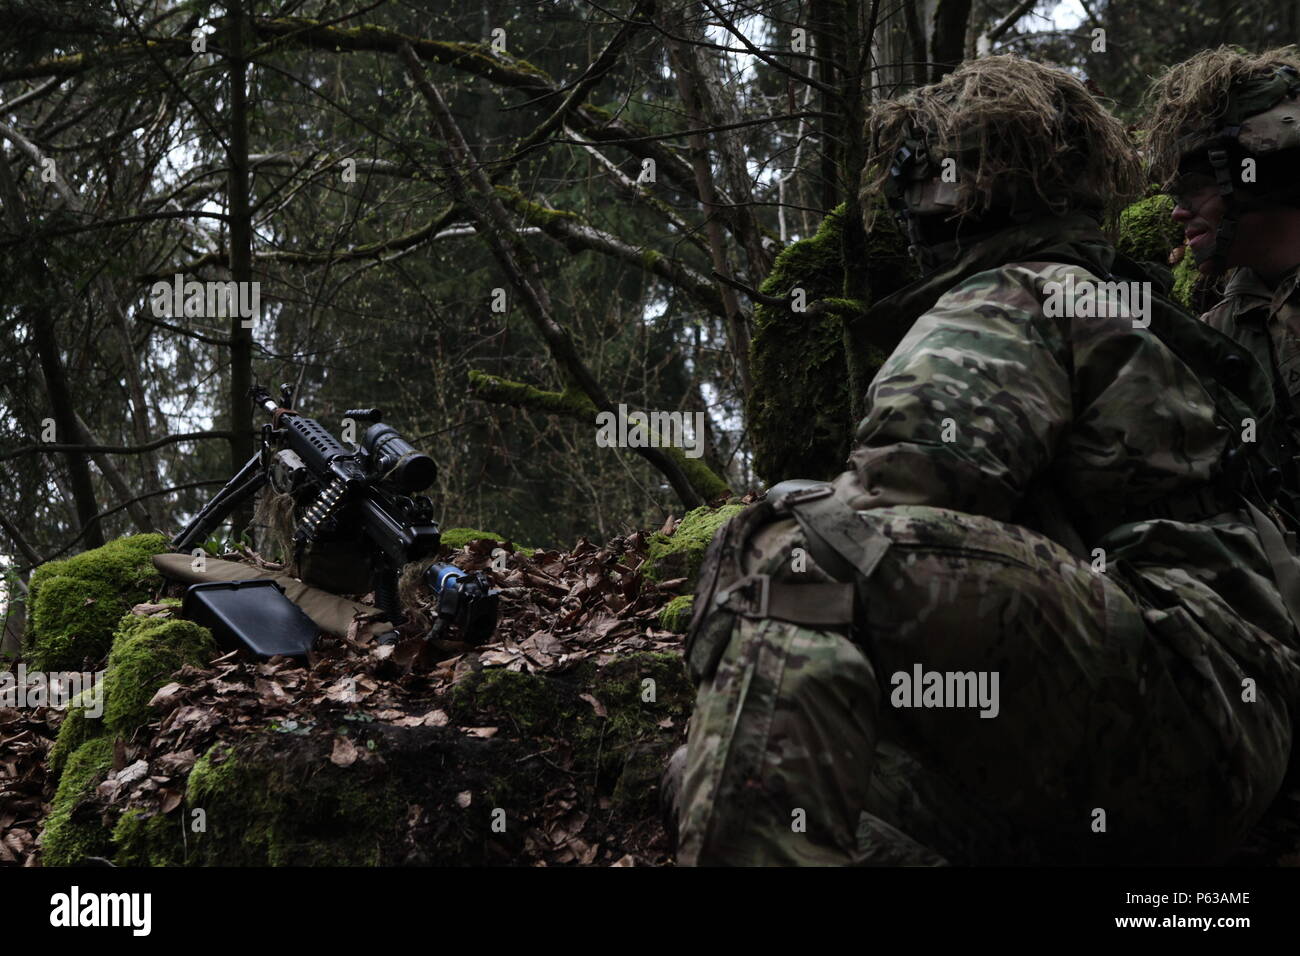 U.S. Soldiers from 2nd Battalion, 503rd Airborne Infantry Regiment, 173rd Airborne Brigade, scan their sector of fire while conducting a reconnaissance training mission during exercise Saber Junction 16 at the U.S. Army’s Joint Multinational Readiness Center (JMRC) in Hohenfels, Germany, April 15, 2016. Saber Junction 16 is the U.S. Army Europe’s 173rd Airborne Brigade’s combat training center certification exercise, taking place at the JMRC in Hohenfels, Germany, Mar. 31-Apr. 24, 2016.  The exercise is designed to evaluate the readiness of the Army’s Europe-based combat brigades to conduct un Stock Photo